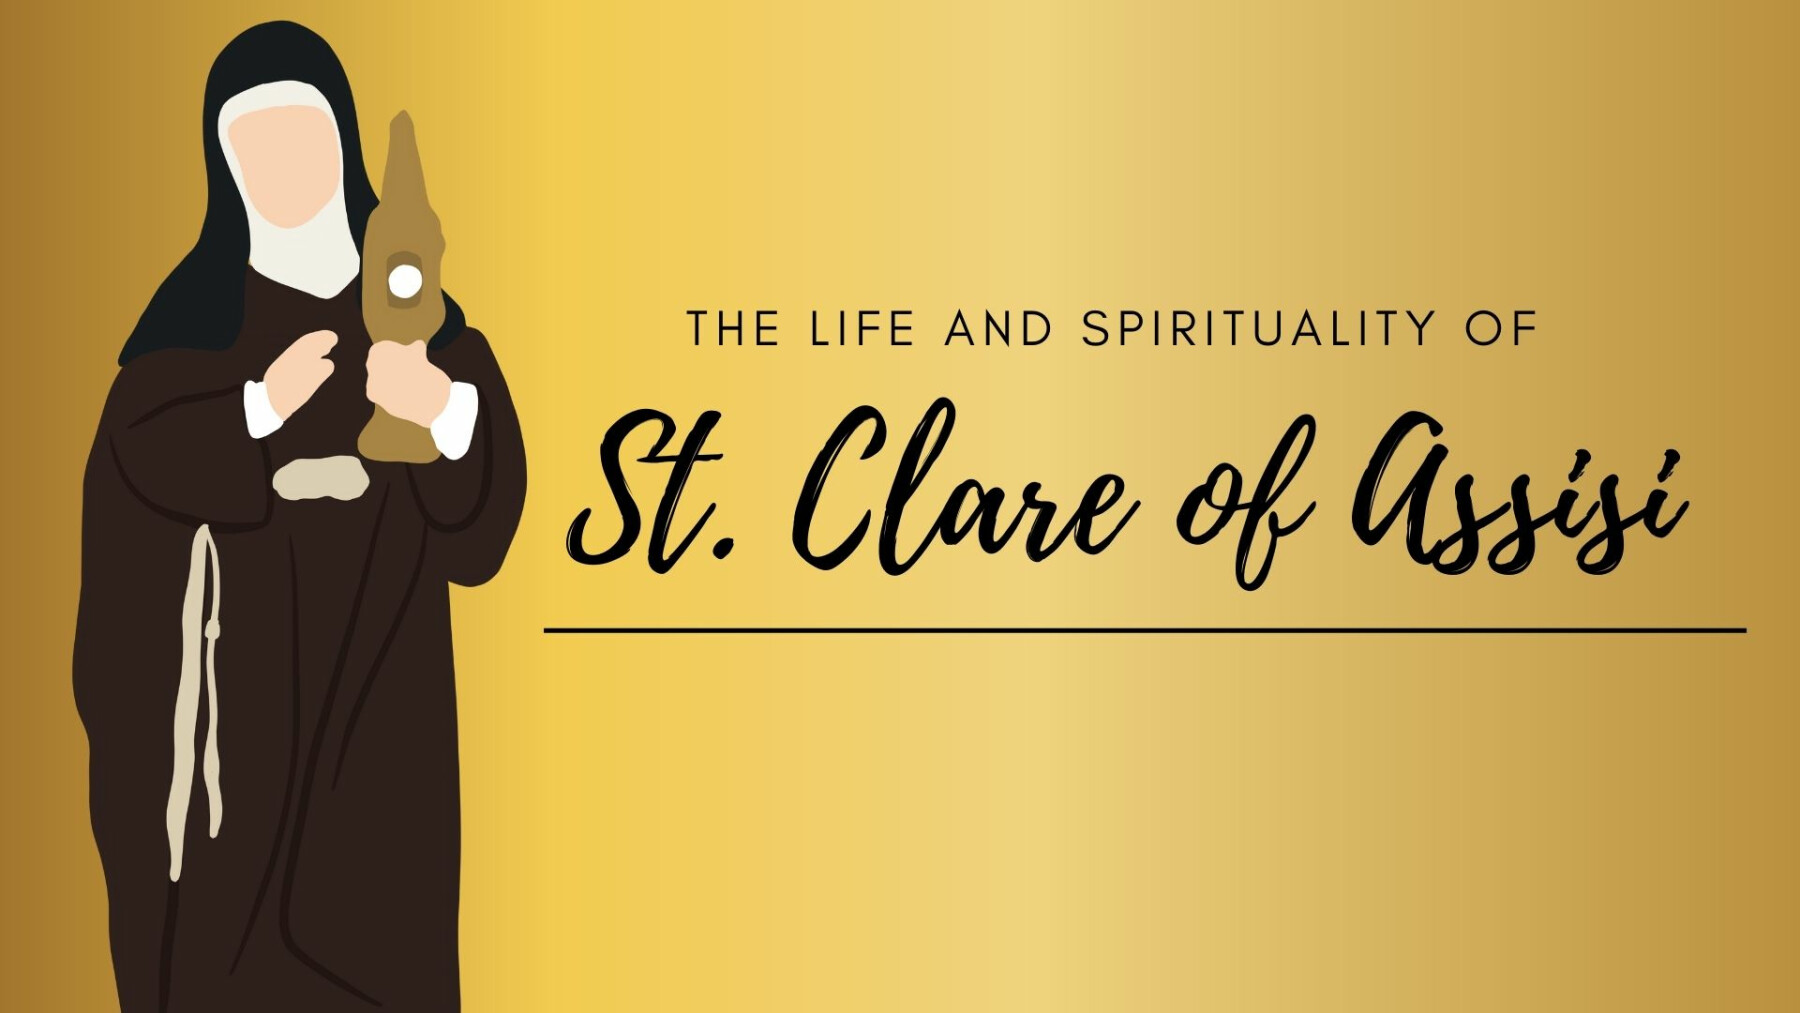 The Life and Spirituality of Saint Clare of Assisi